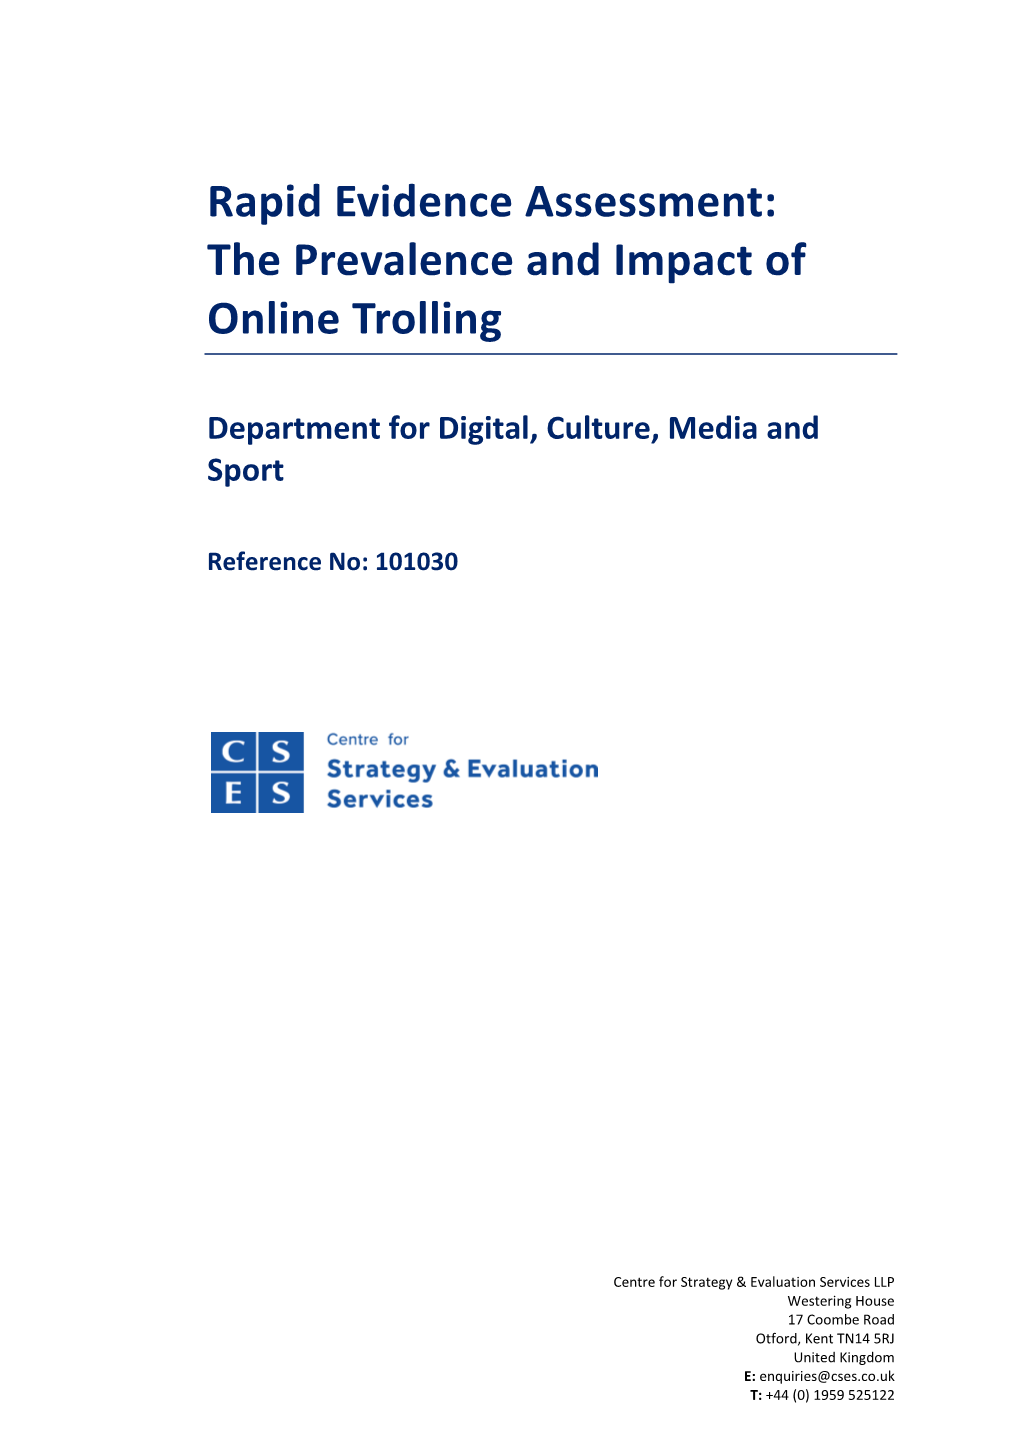 Prevalence and Impact of Online Trolling